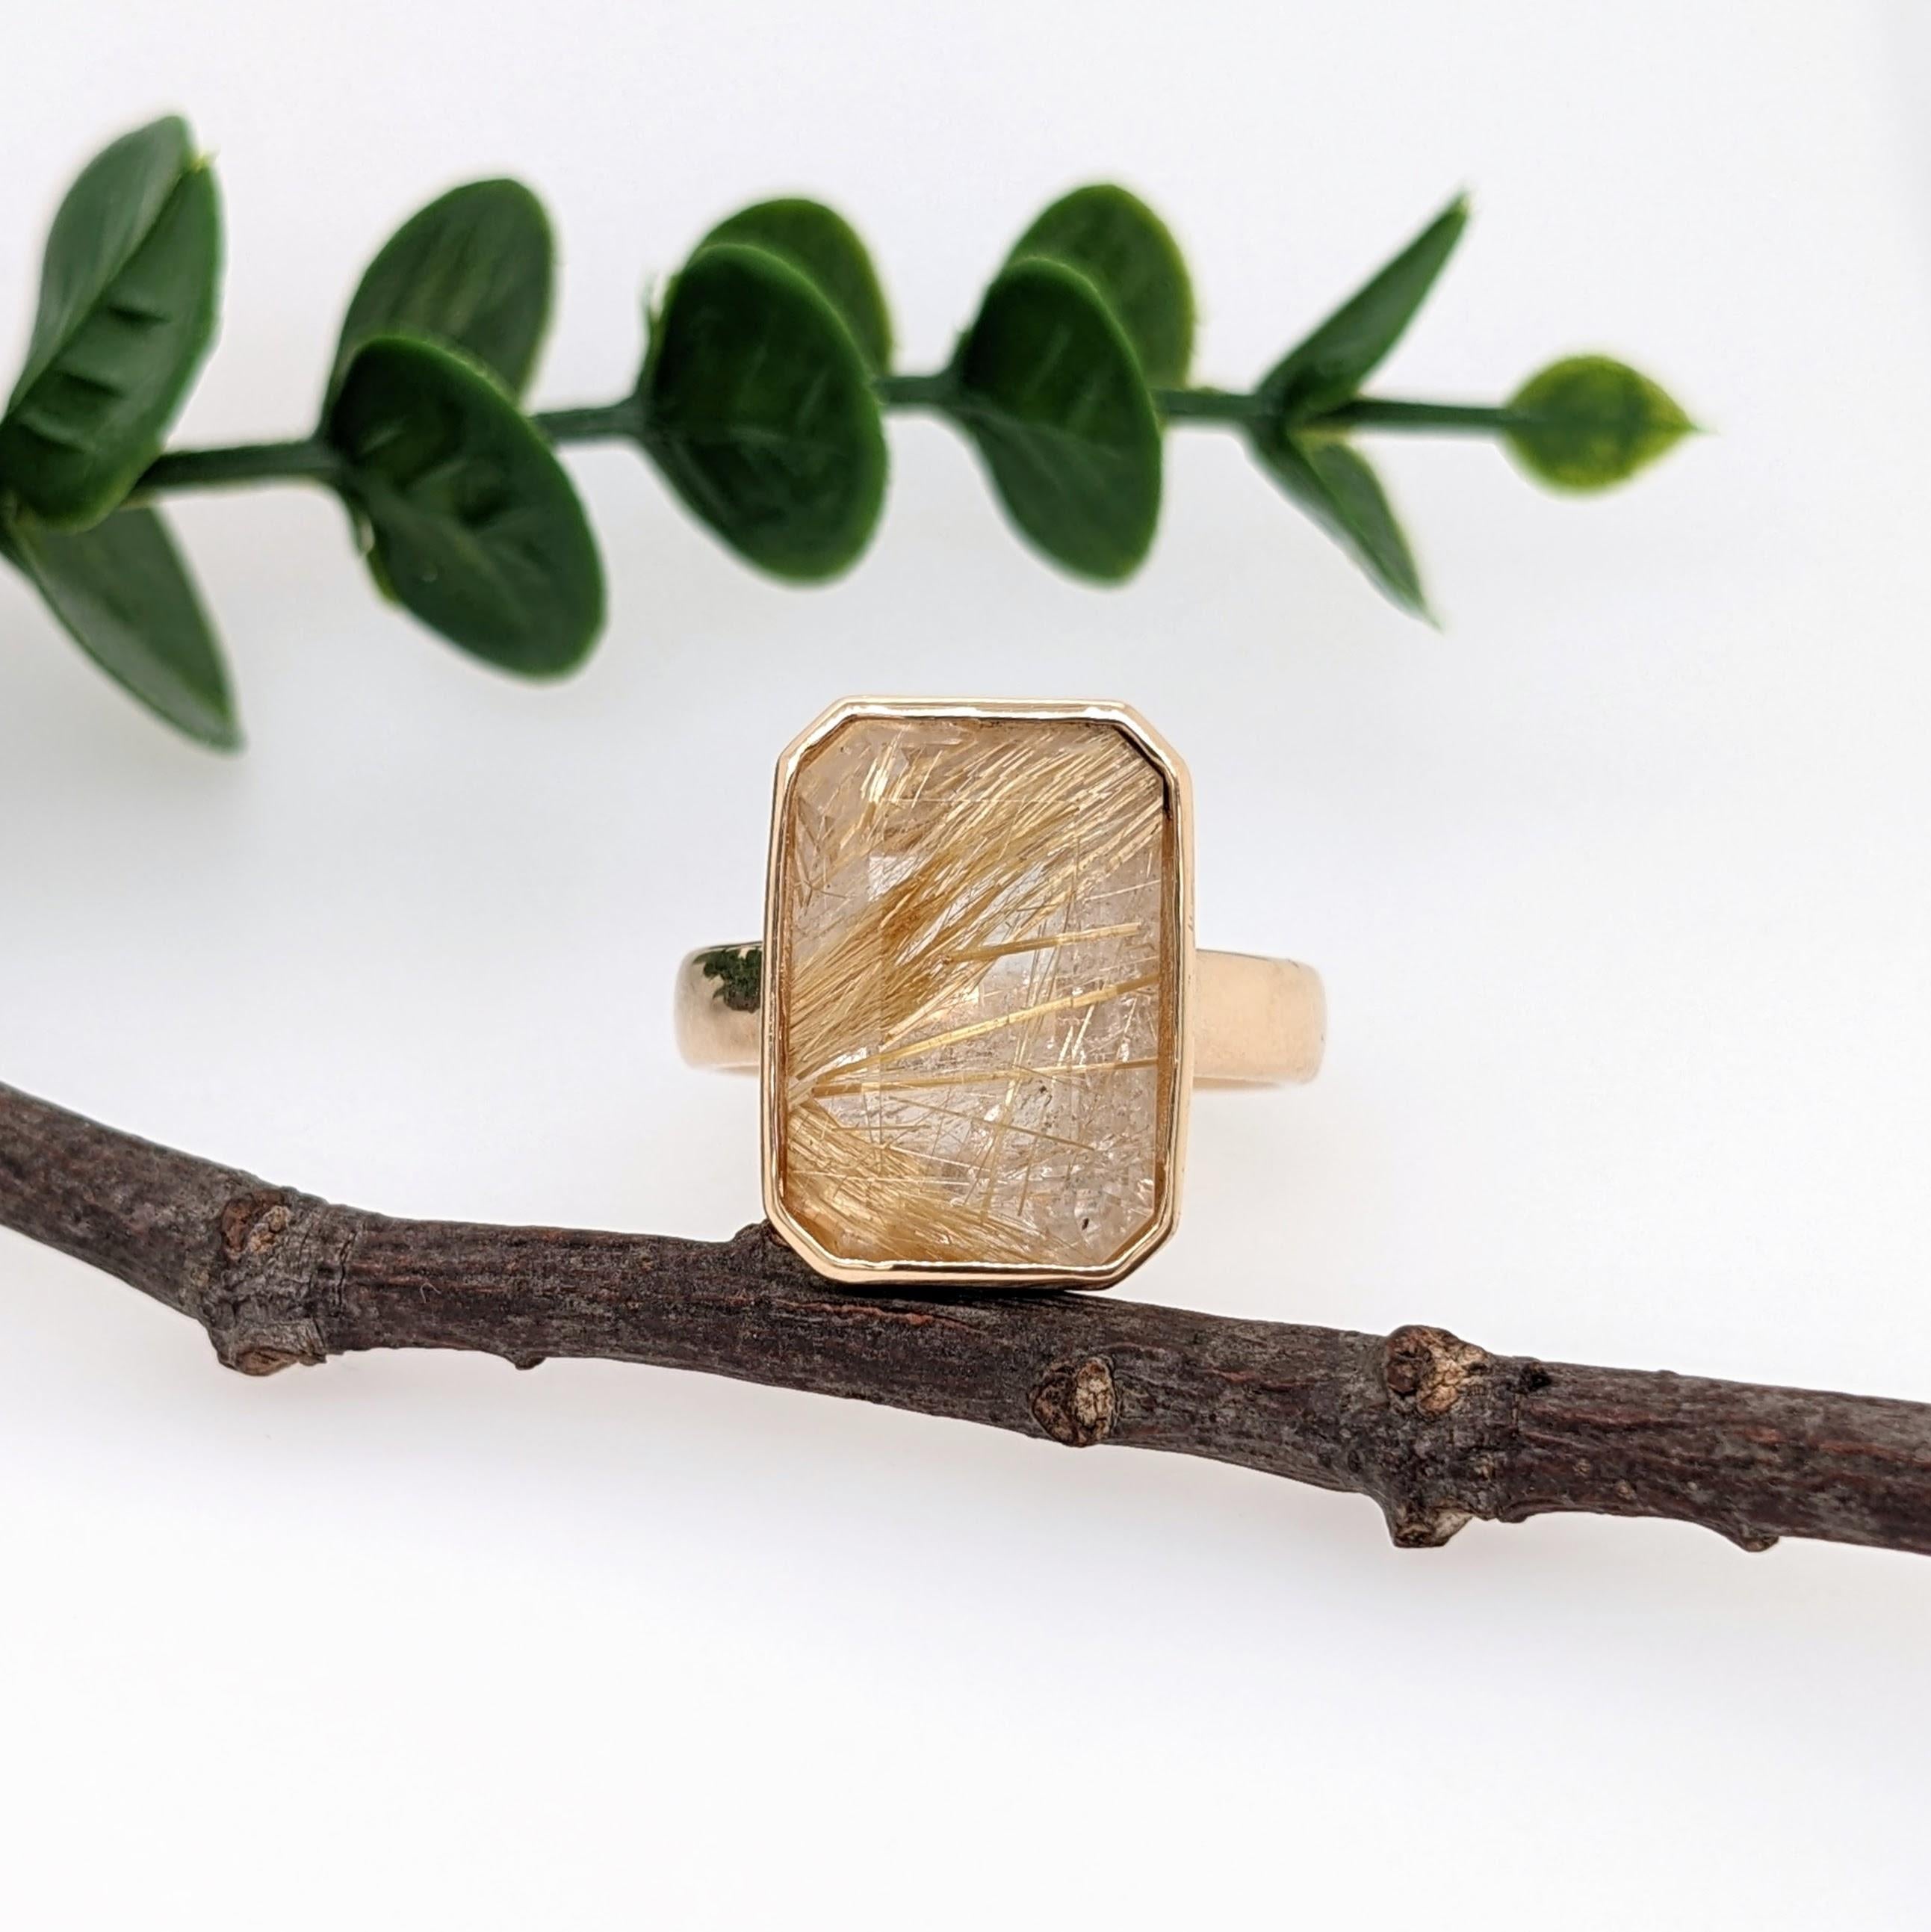 This elegant golden rutile quartz ring in 18K yellow gold is perfect to wear for any occasion. This solitaire ring features a emerald cut rutilated quartz set in a classic 18k gold mount with a straight comfort band. Would make a beautiful Christmas